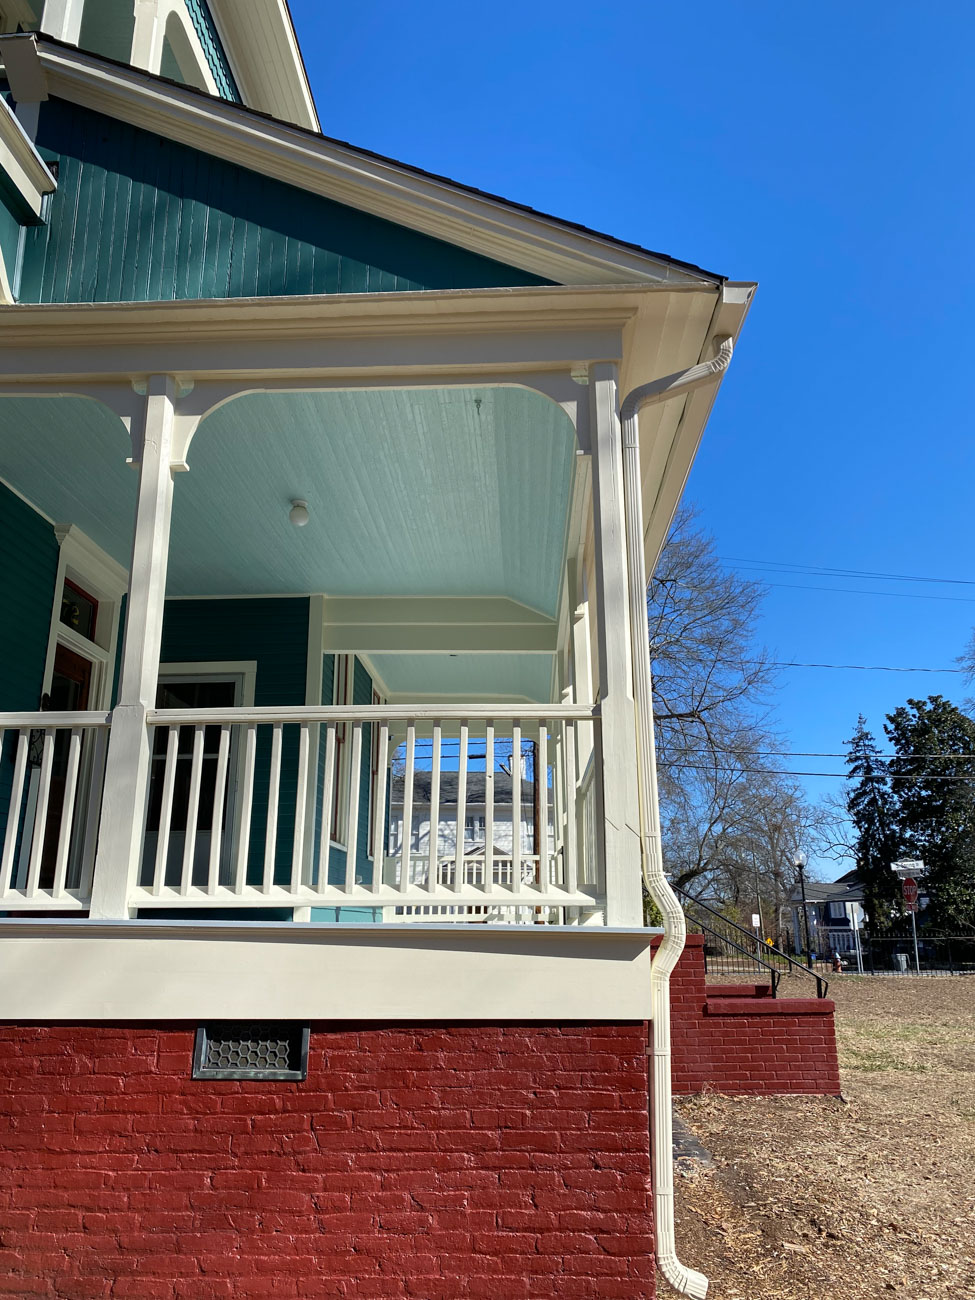 Gutters on Historic Home